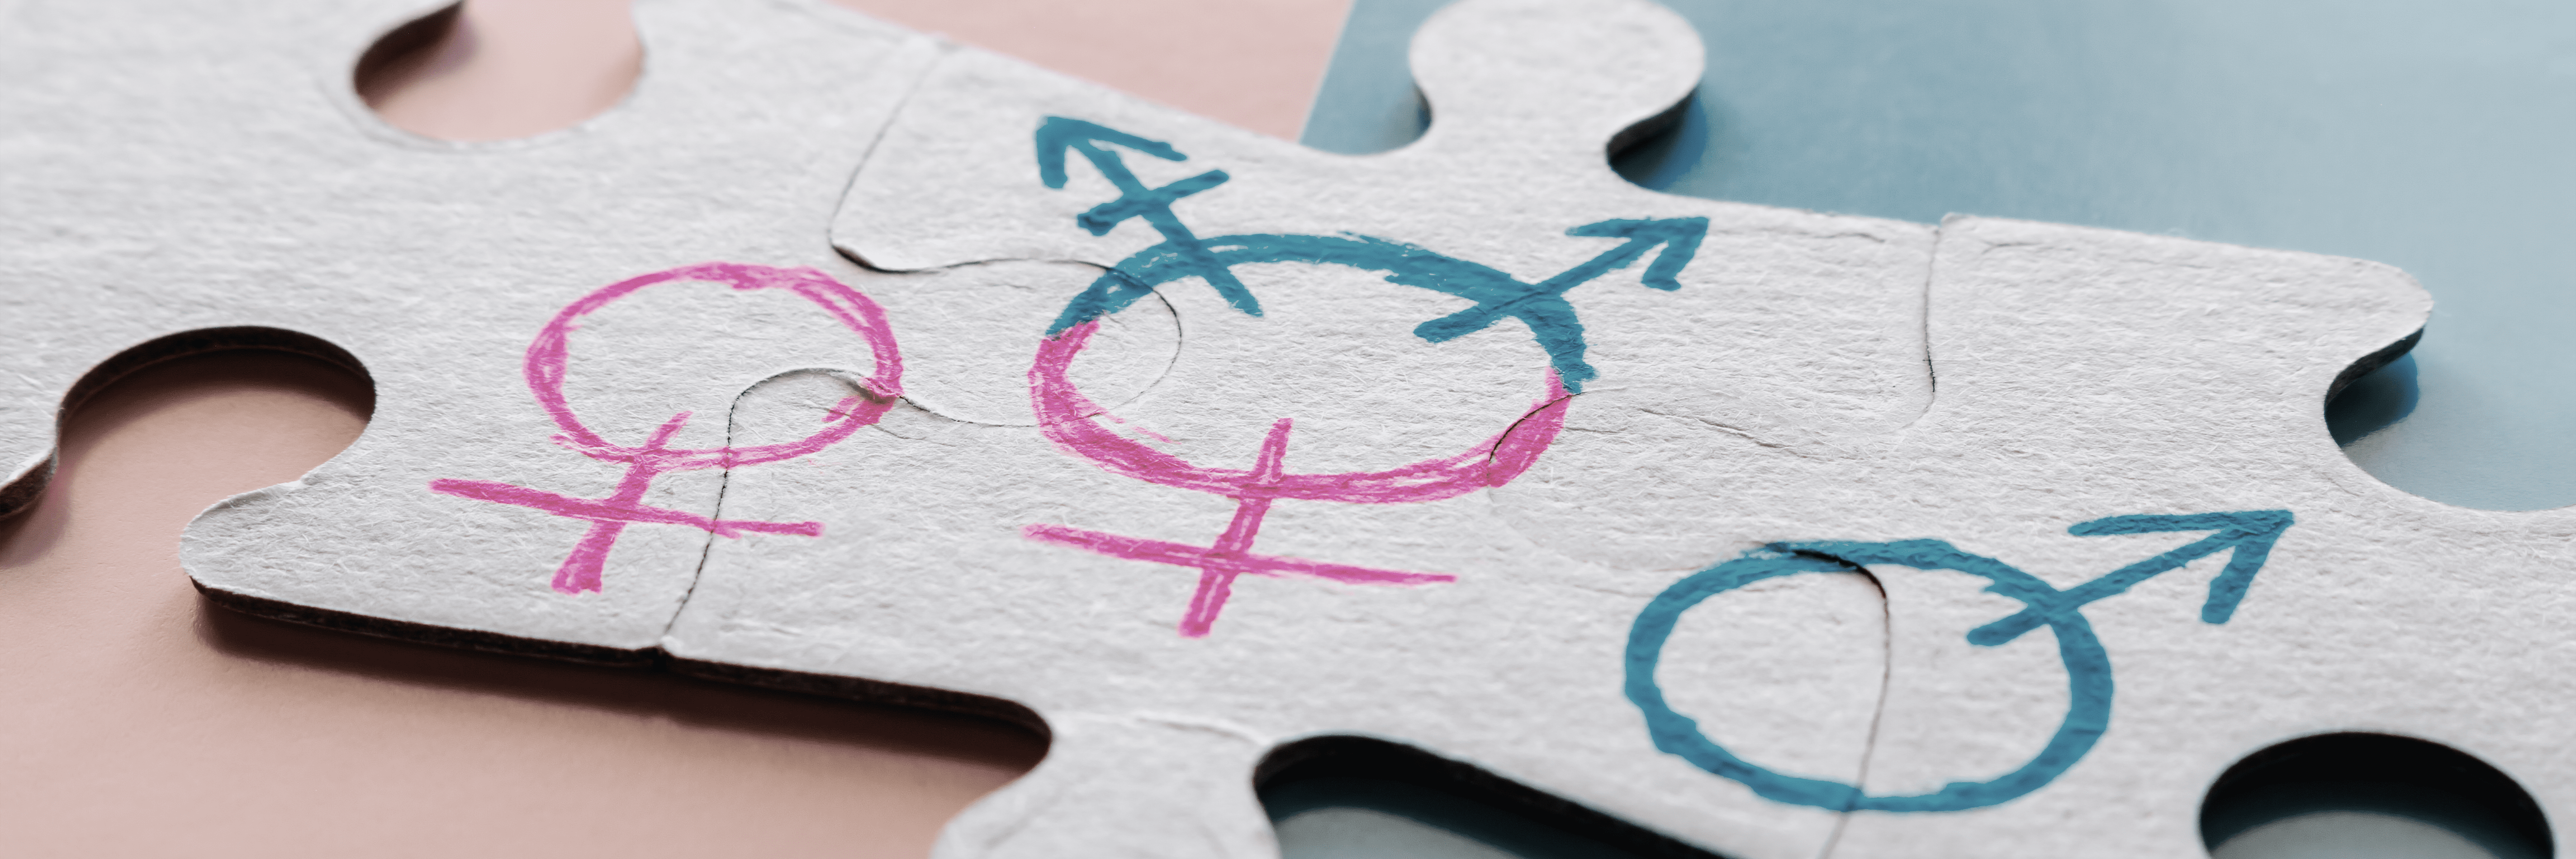 Grey cardboard jigsaw pieces with hand drawn gender icons in magenta and cyan